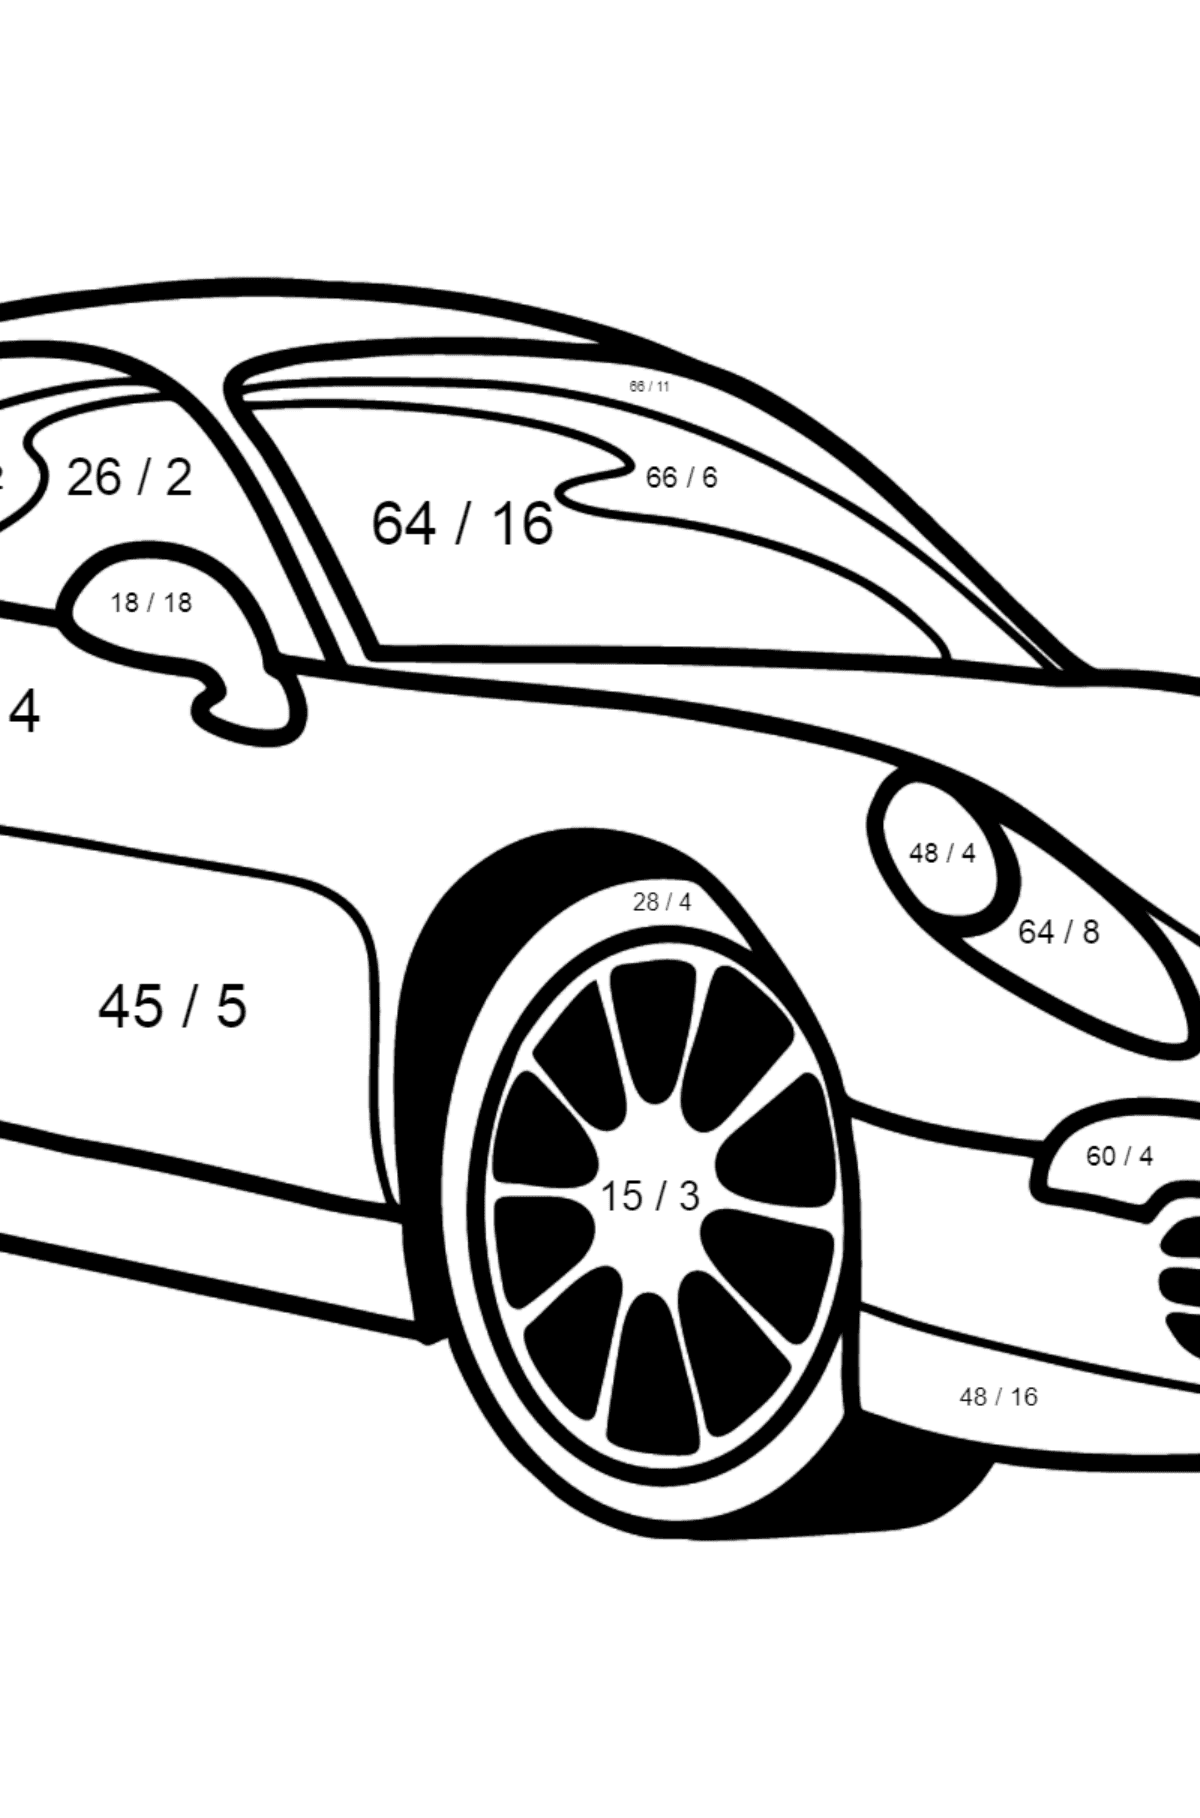 Porsche Cayman Sports Car coloring page - Math Coloring - Division for Kids